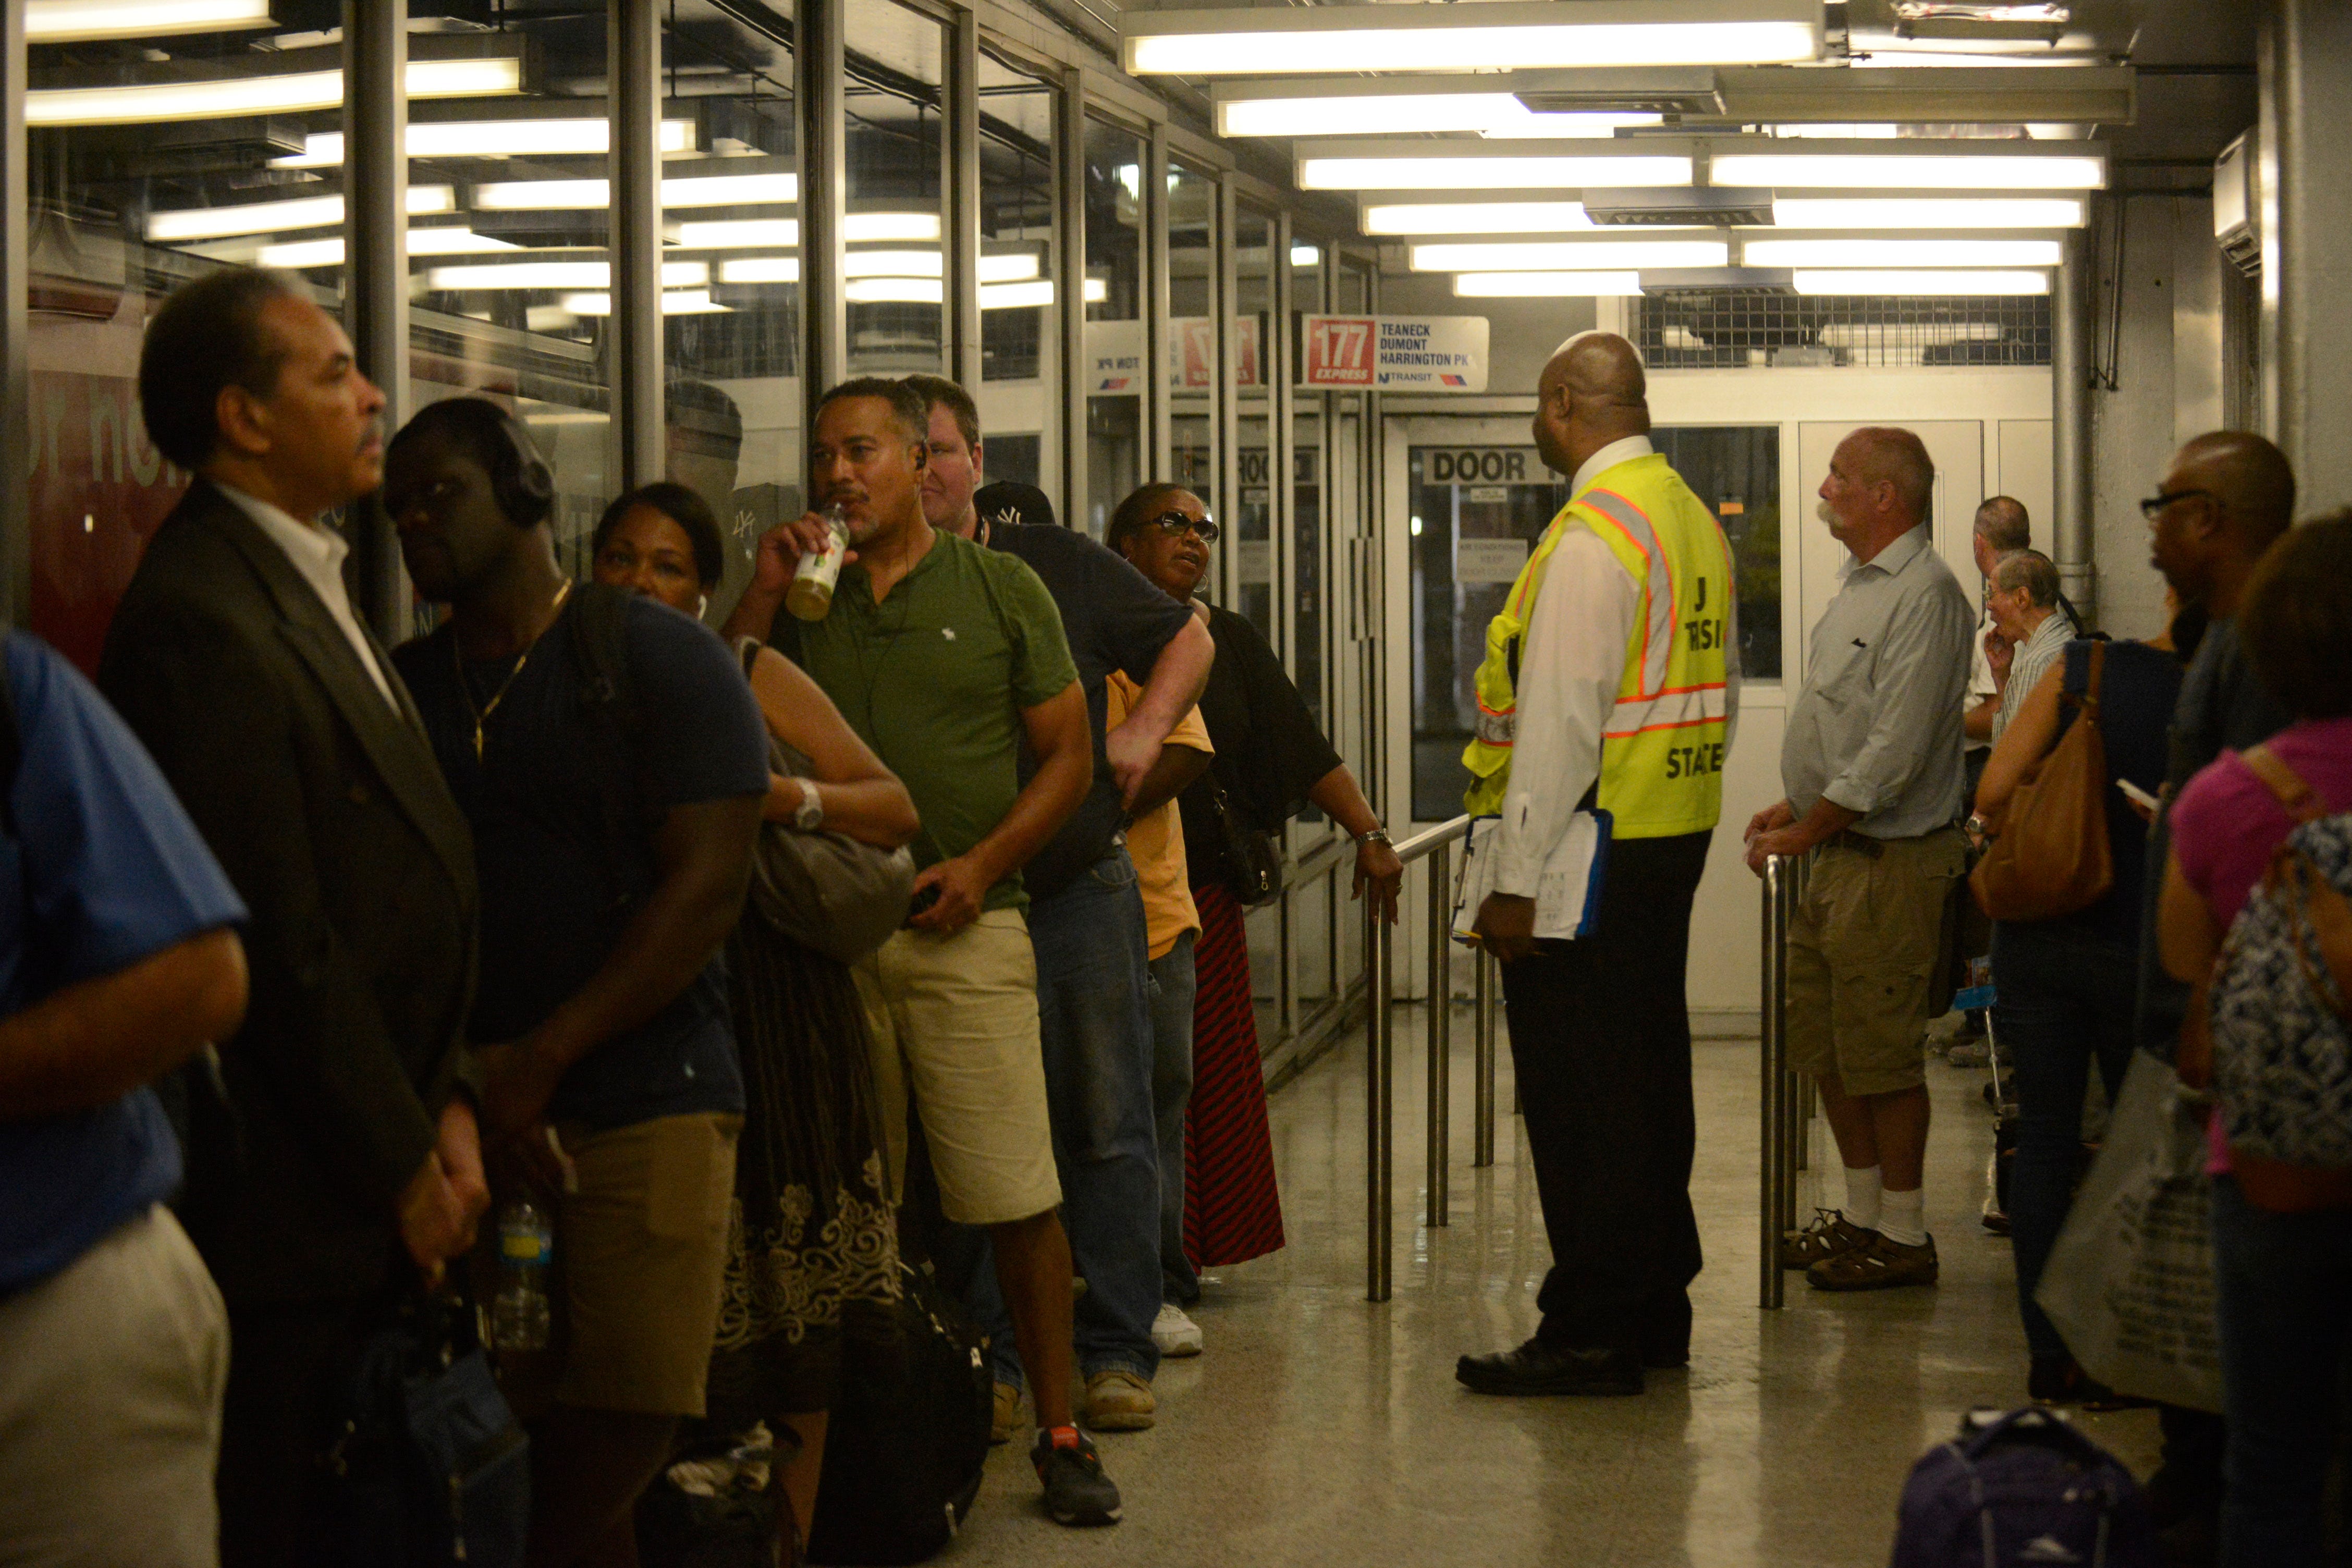 Commuters wait to get on the bus at the Port Authority Bus Terminal on the first day of new gate assignments, part of the agency's efforts in 2015 to reduce congestion and delays by getting buses through the building more efficiently. Sept. 8, 2015